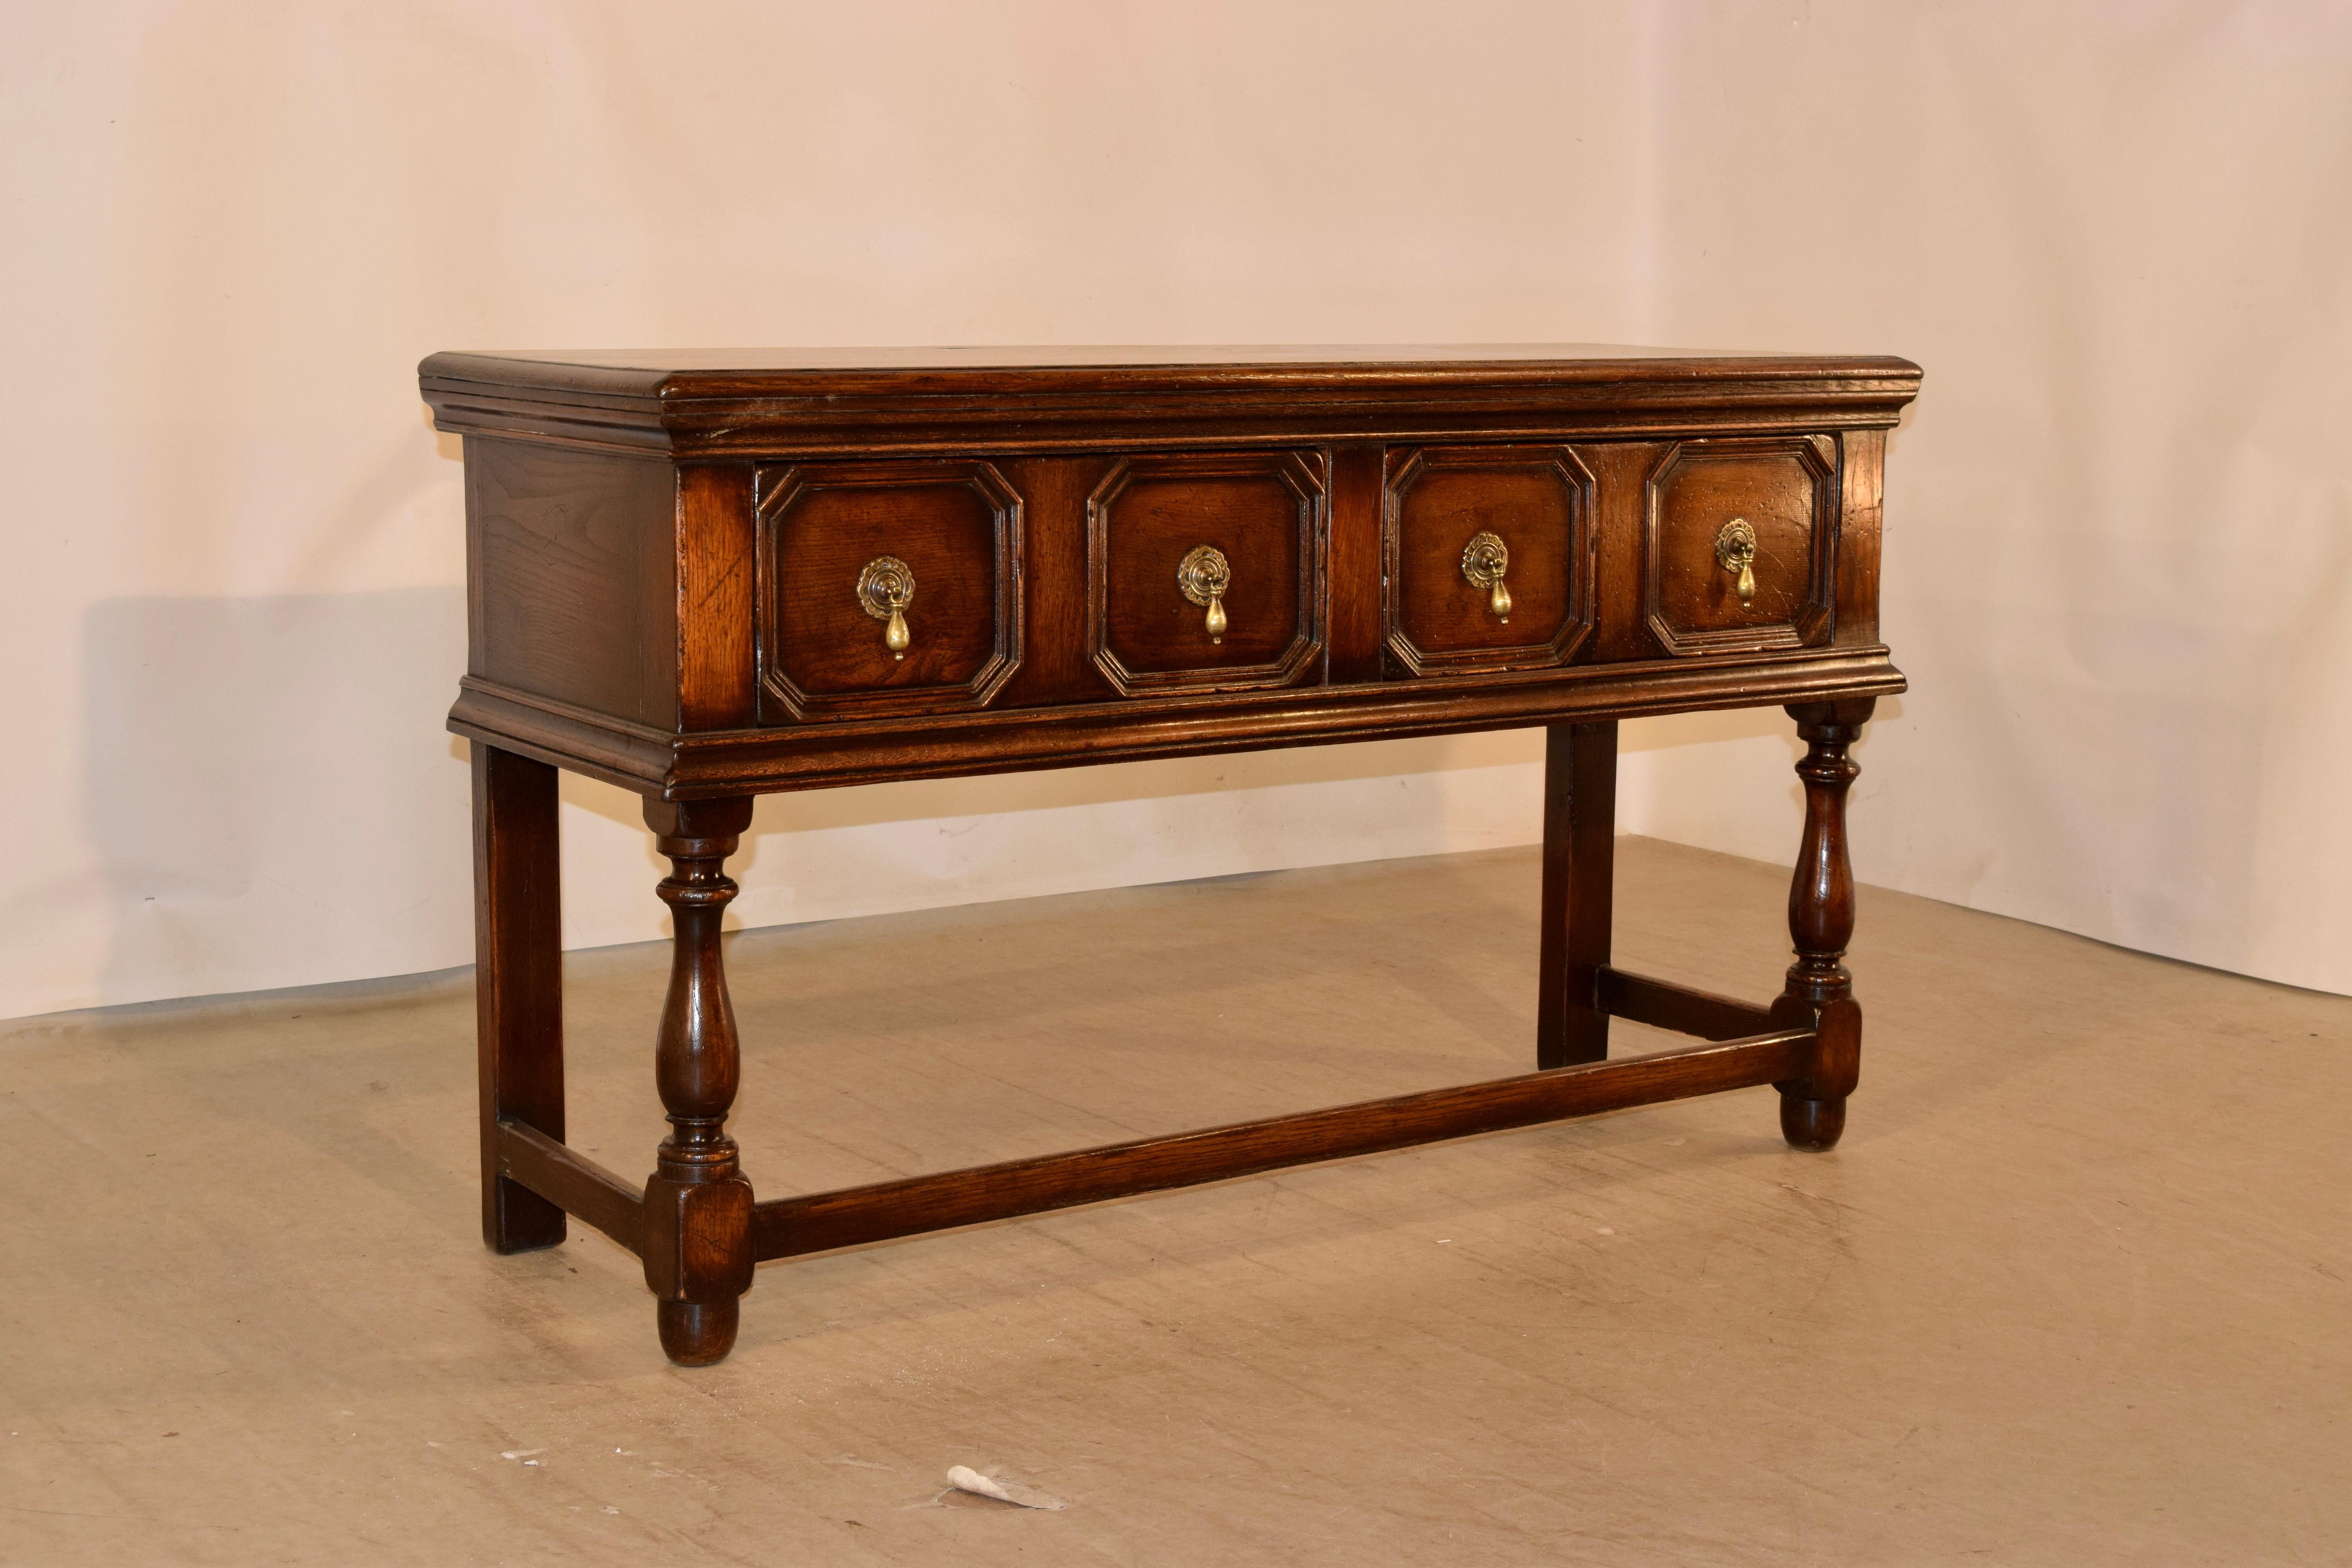 Late 19th century oak sideboard from England. The top has a beveled and molded edge, following down to simple sides and two raised paneled drawers in the front, with hand cast brass hardware. The legs are wonderfully hand-turned in the front and